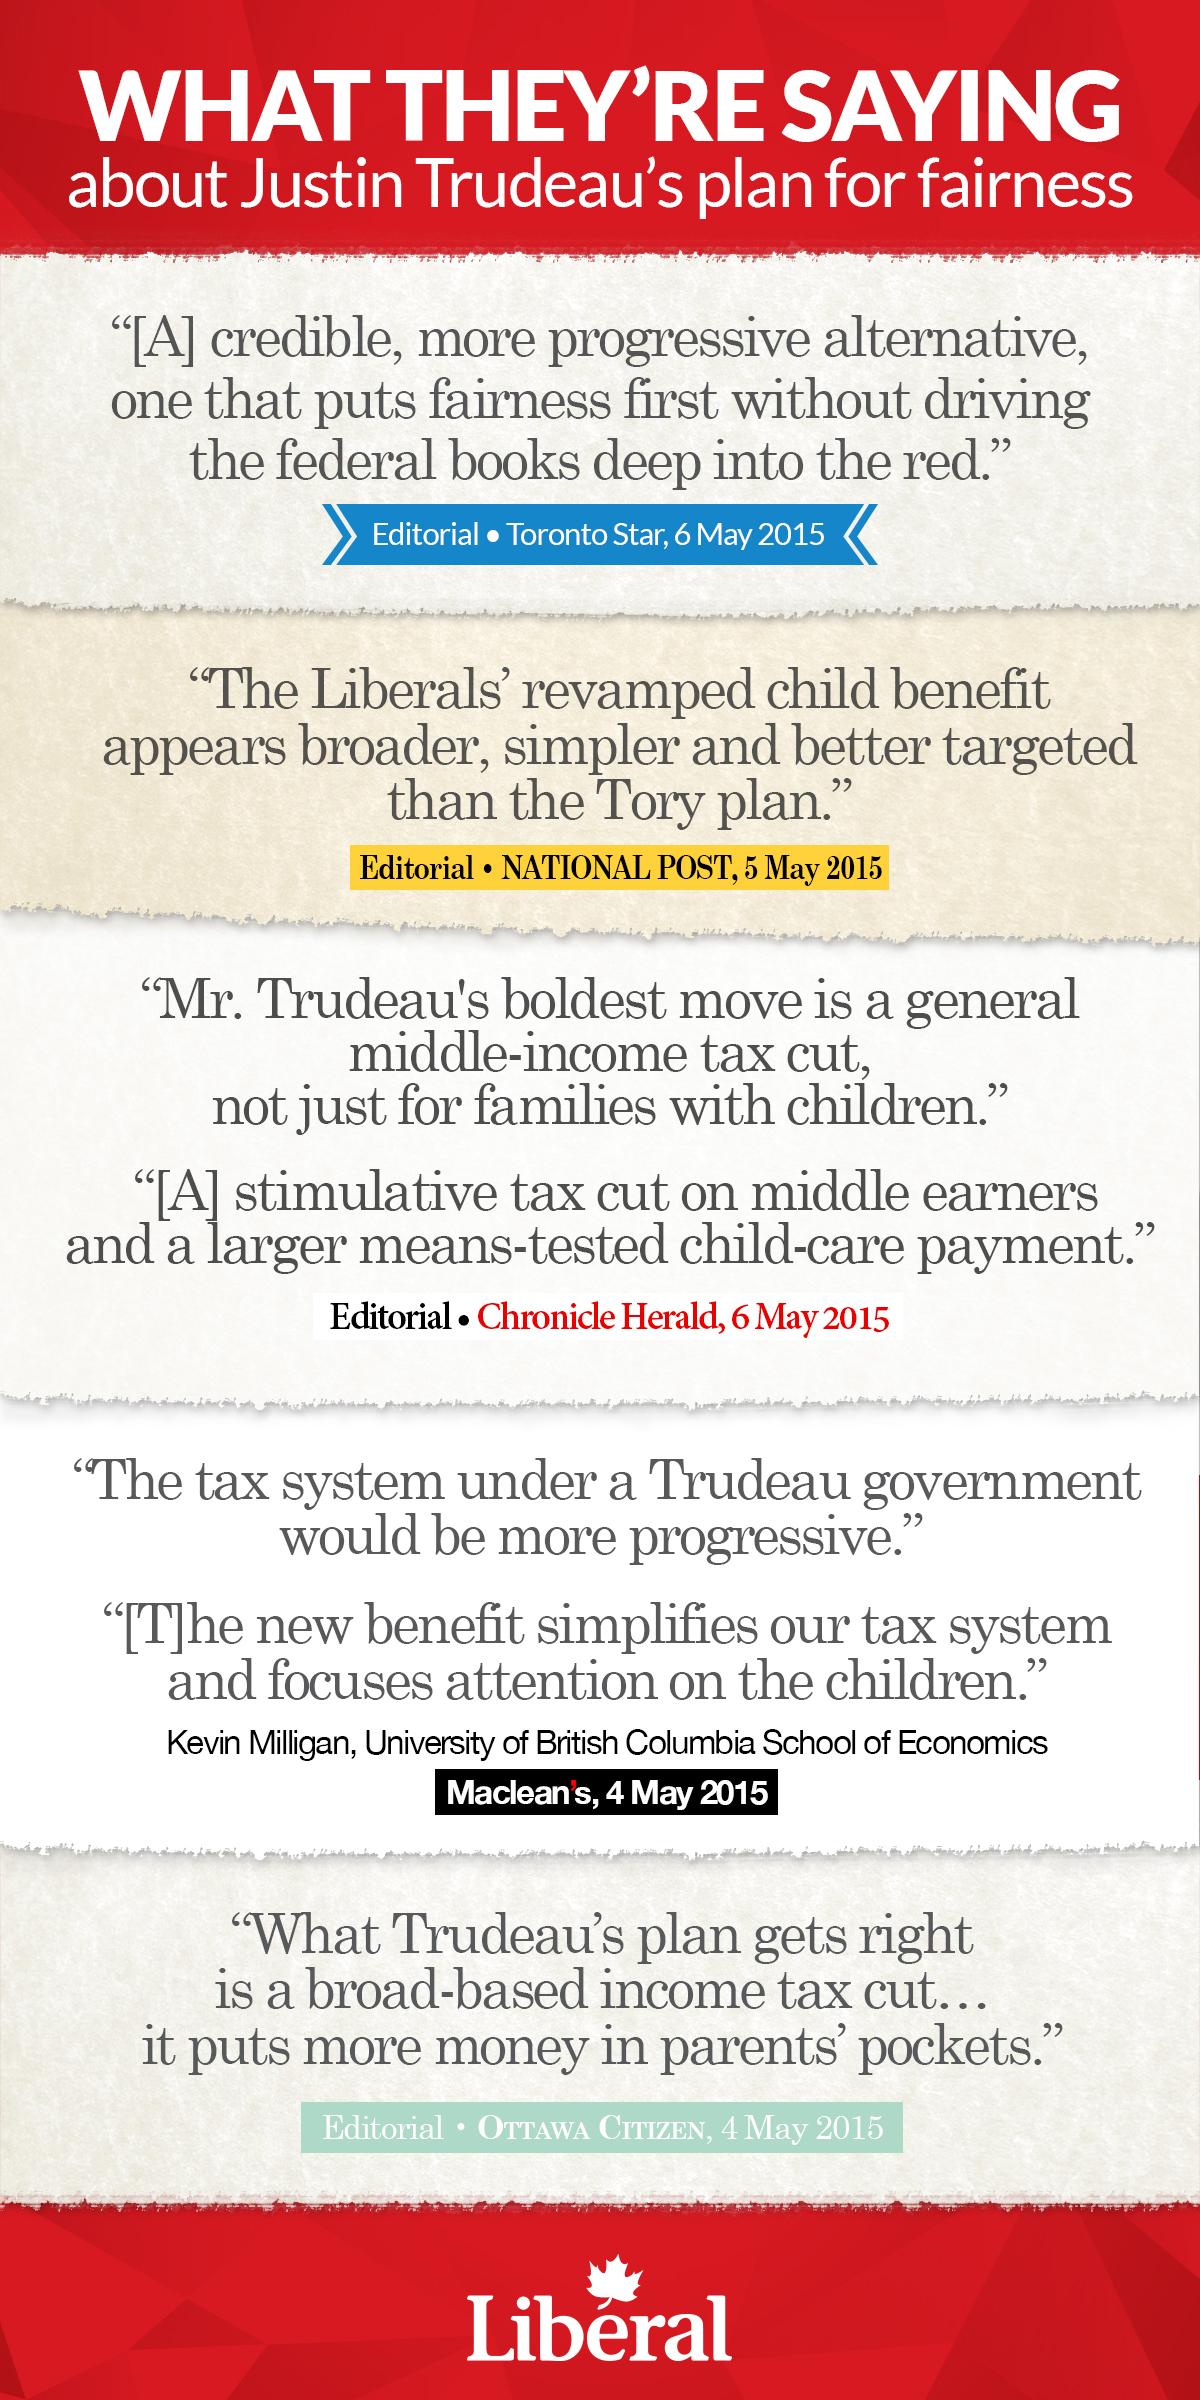 What they're saying about Justin Trudeau's plan for fairness  “[A] credible, more progressive alternative, one that puts fairness first without driving the federal books deep into the red.” Editorial Toronto Star, 6 May 2015  “Mr. Trudeau's boldest move is a general middle-income tax cut, not just for families with children.”  “[A] stimulative tax cut on middle earners and a larger means-tested child-care payment.” Editorial Chronicle Herald, 6 May 2015  “The Liberals’ revamped child benefit appears broader, simpler and better targeted than the Tory plan.” Editorial National Post, 5 May 2015 “The tax system under a Trudeau government would be more progressive.”   “[T]he new benefit simplifies our tax system and focuses attention on the children.” Kevin Milligan, University of British Columbia School of Economics Maclean’s, 4 May 2015